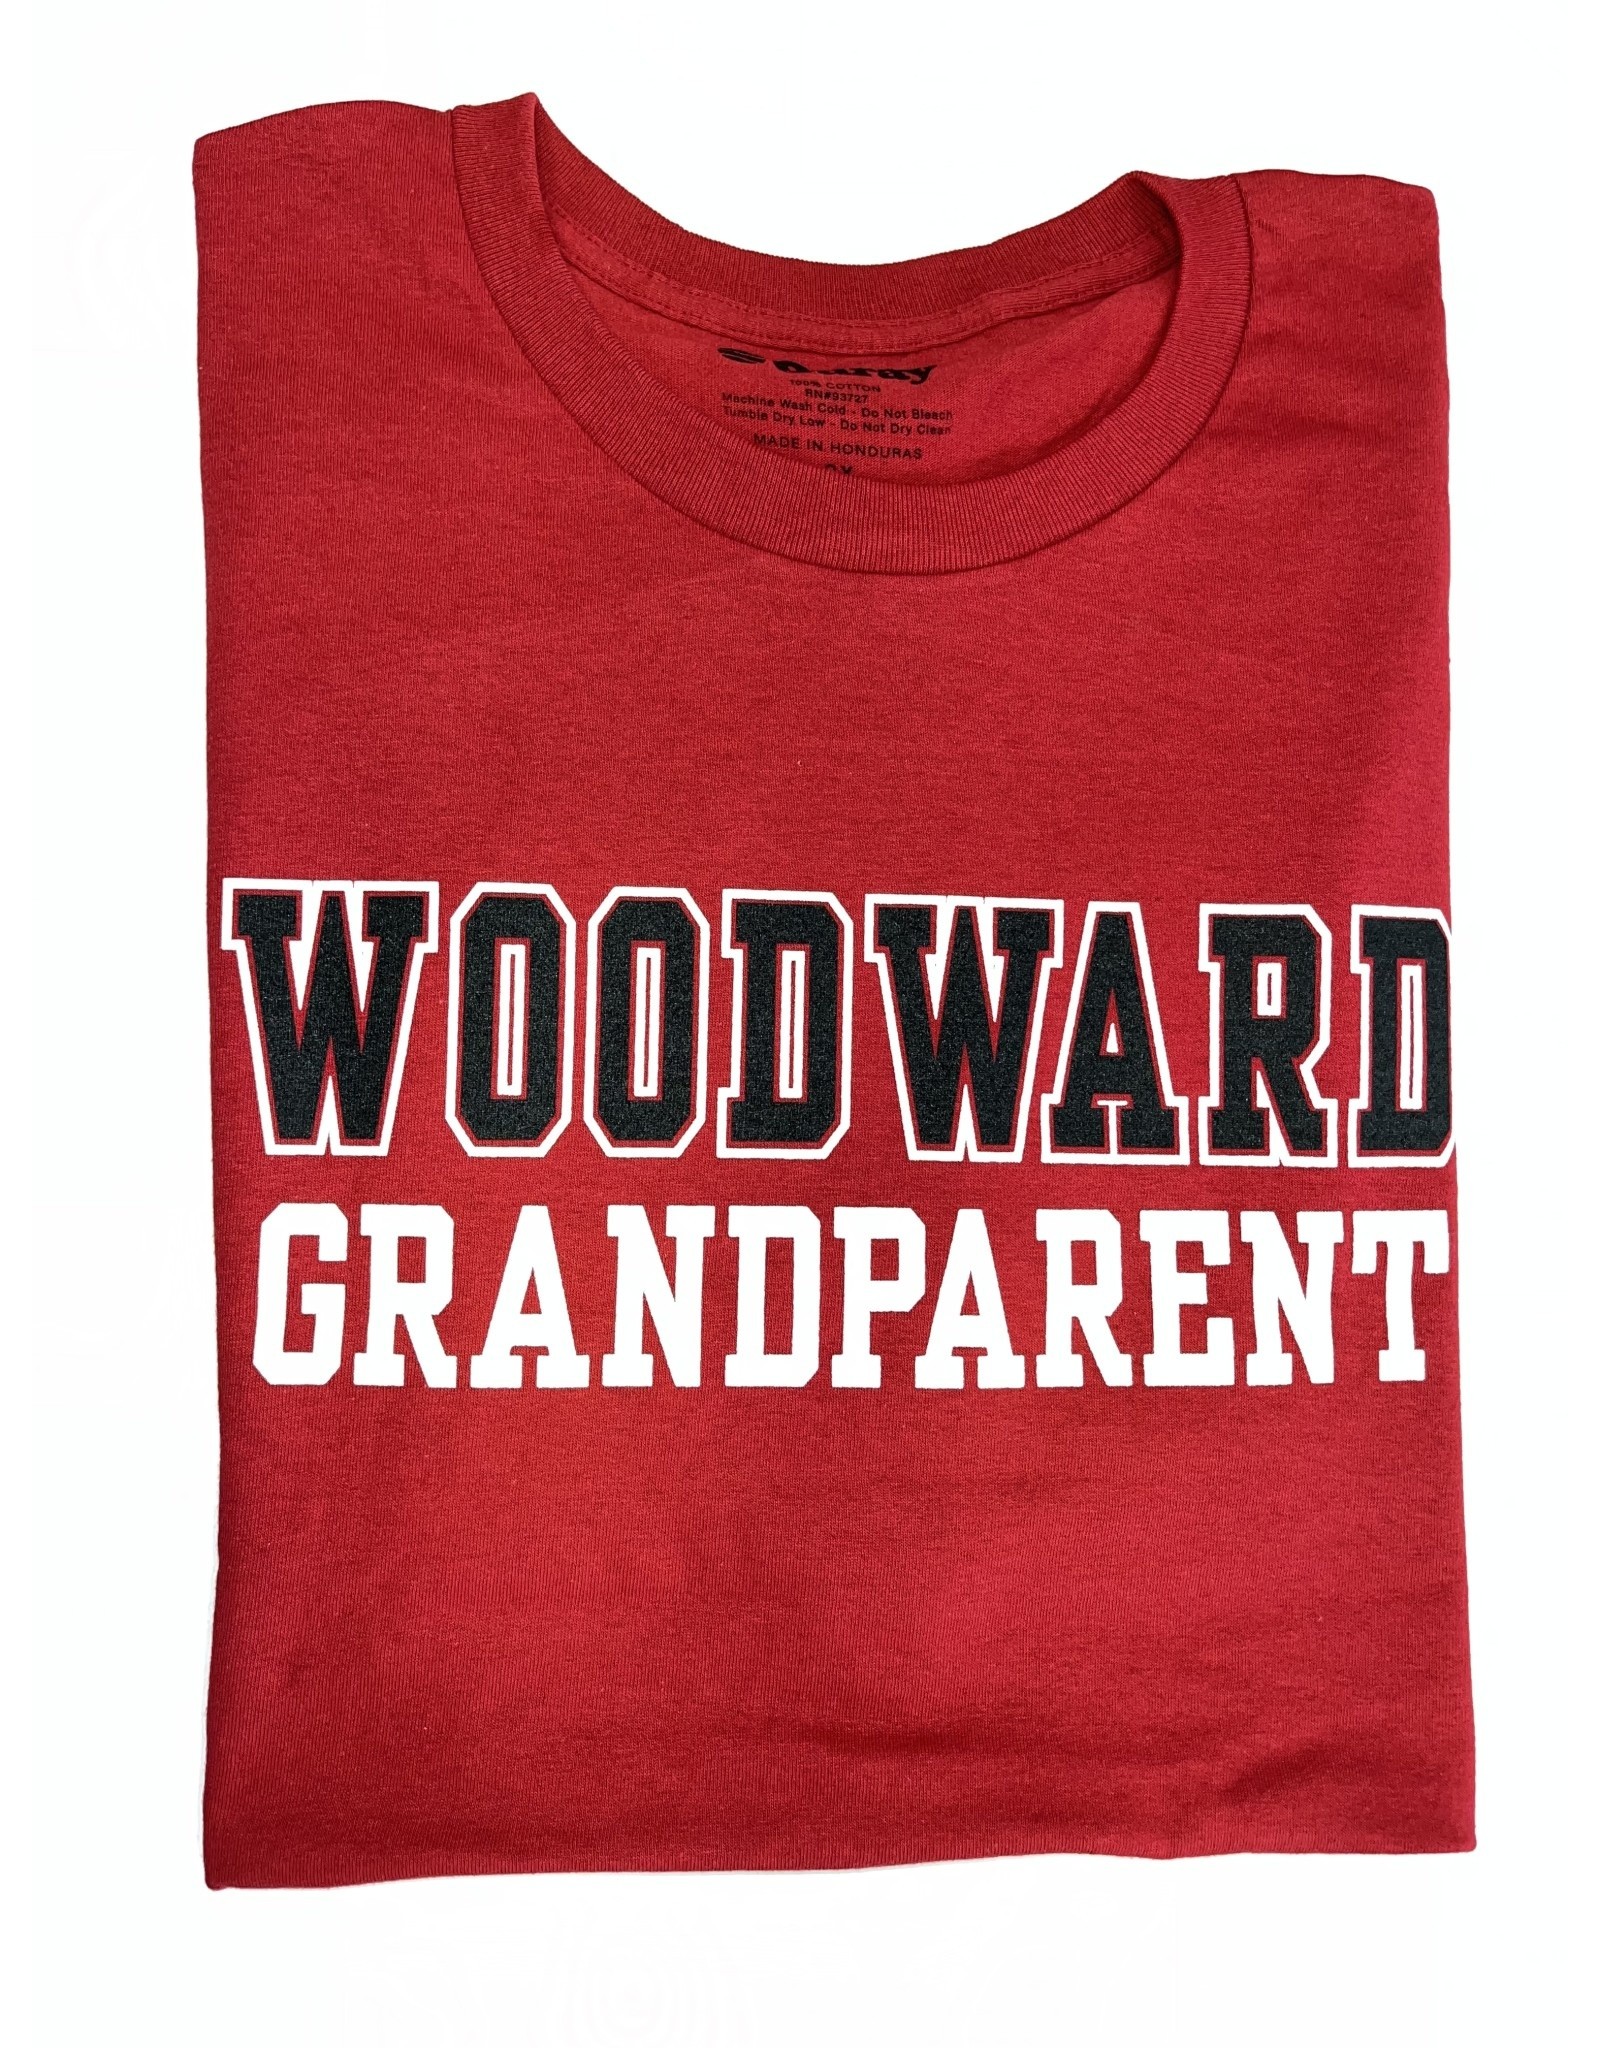 Ouray Woodward Grandparent SS